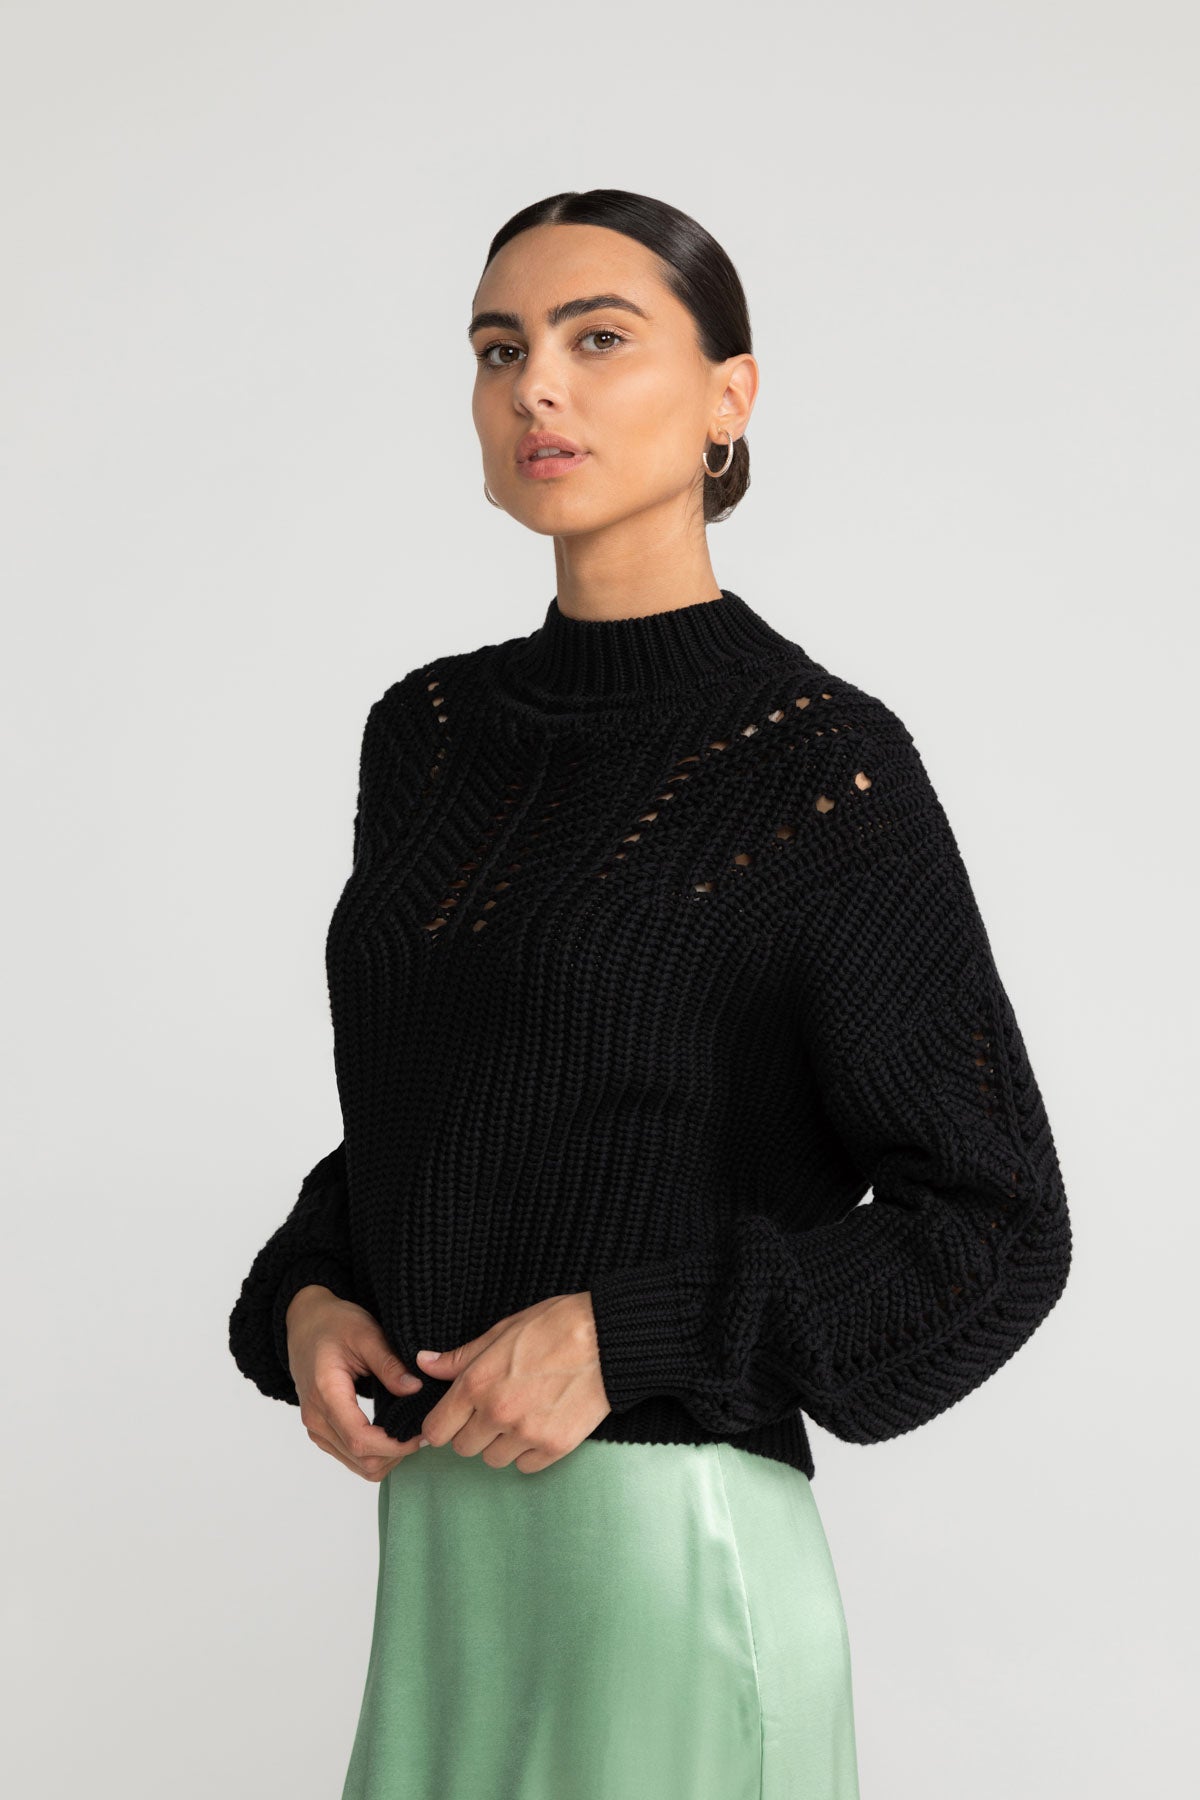 ALEIKA sweater in black from LOVJOI made of organic cotton